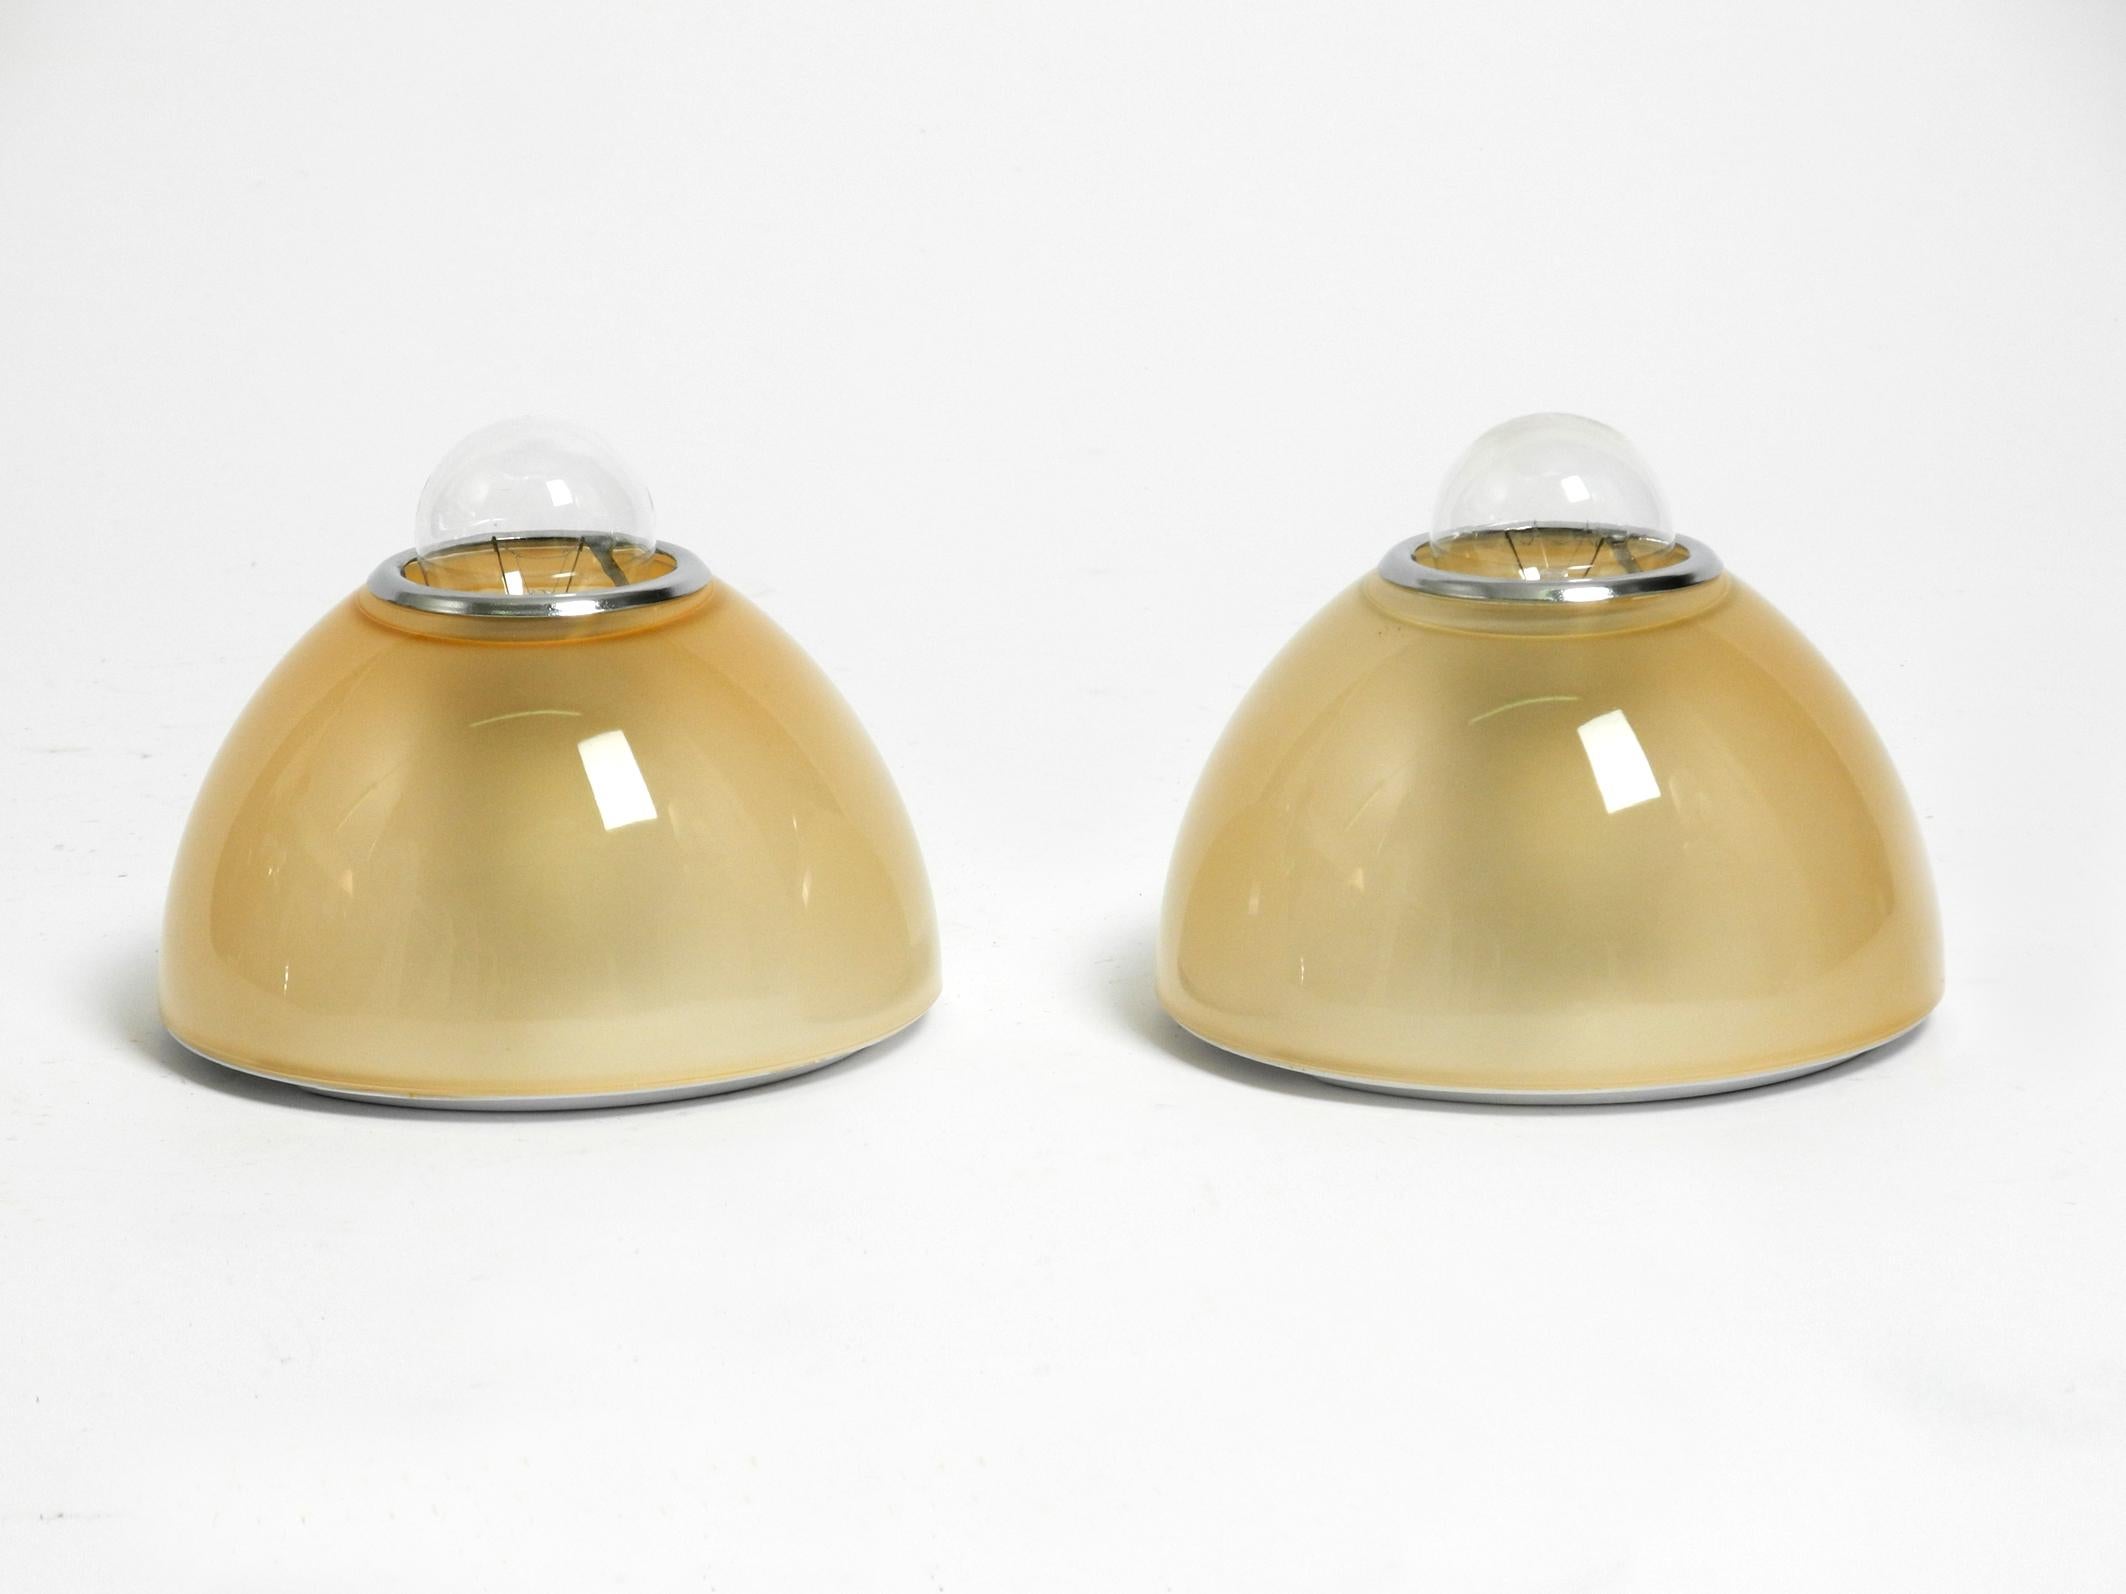 Pair of original ceiling or wall lamps by Ernesto Gismondi for Artemide model Tilos from 1993. He was a member of the influential Memphis design movement,
These Italian classics from the 90s are no longer being built.
Can be used beautifully as